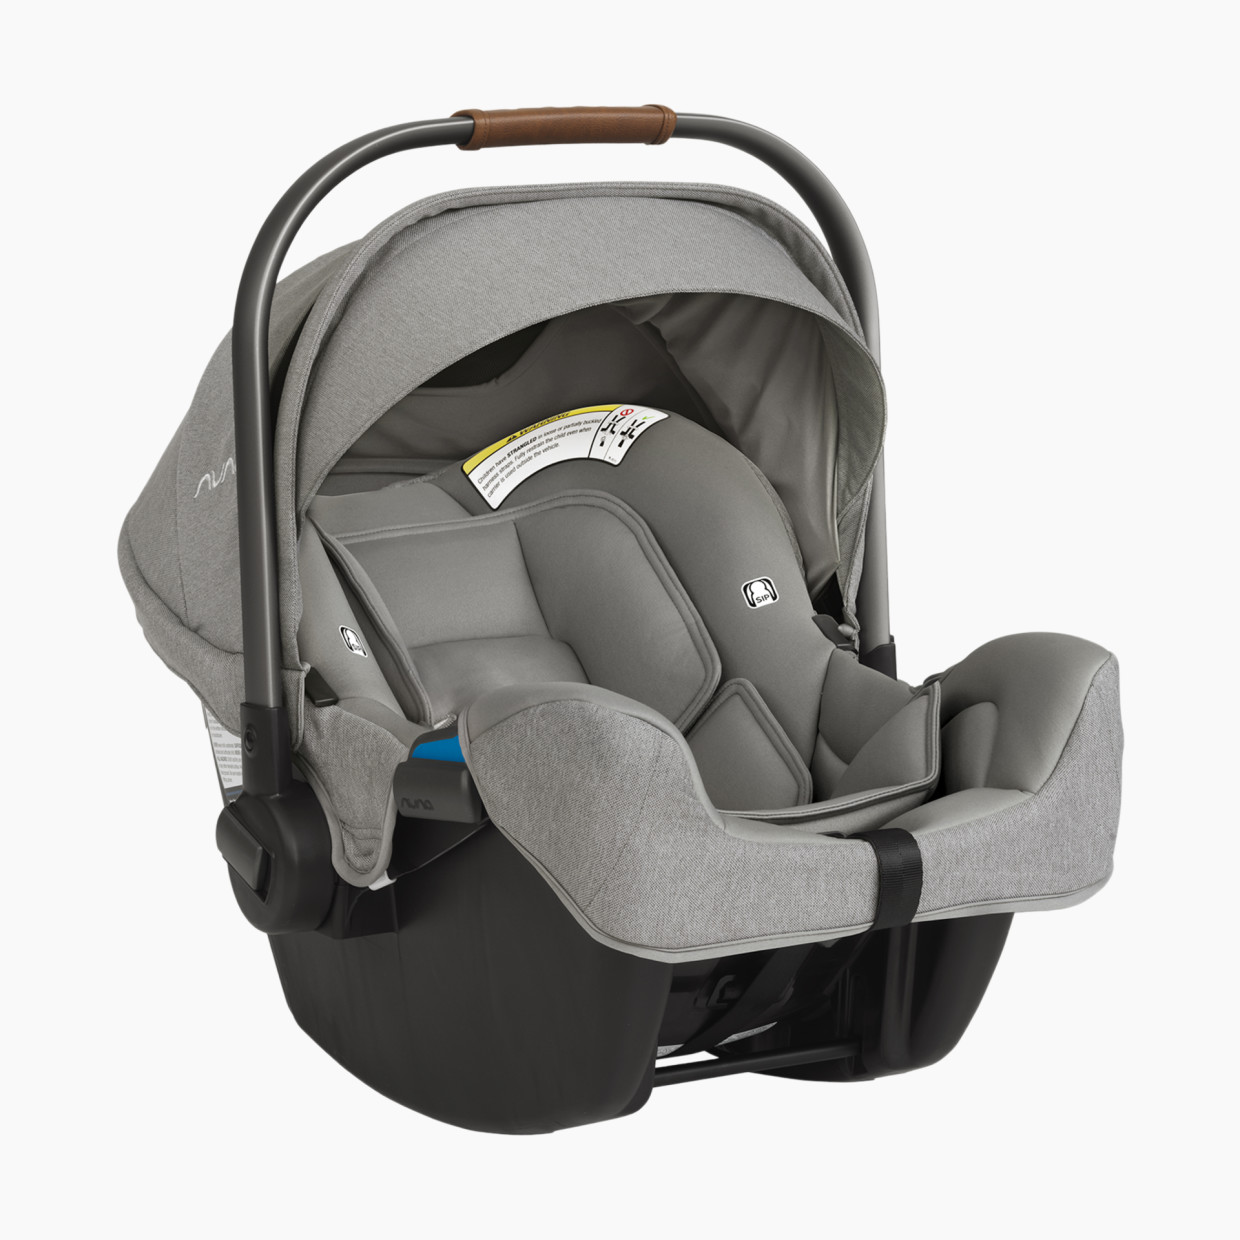 Nuna Pipa Infant Car Seat and Base - Frost.